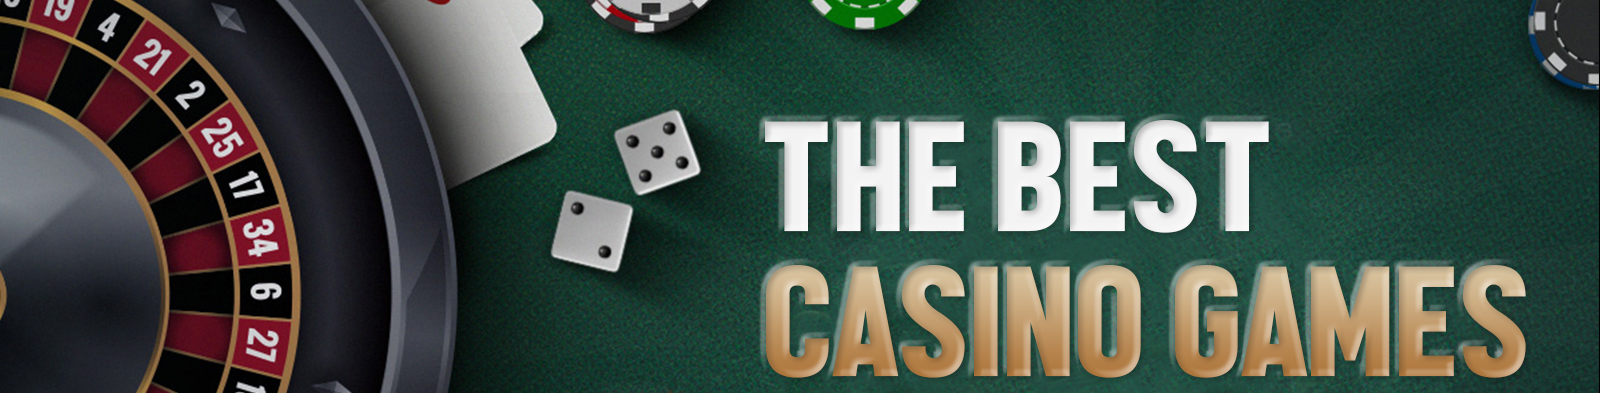 The Best Casino Games from Casino Parties of New Jersey